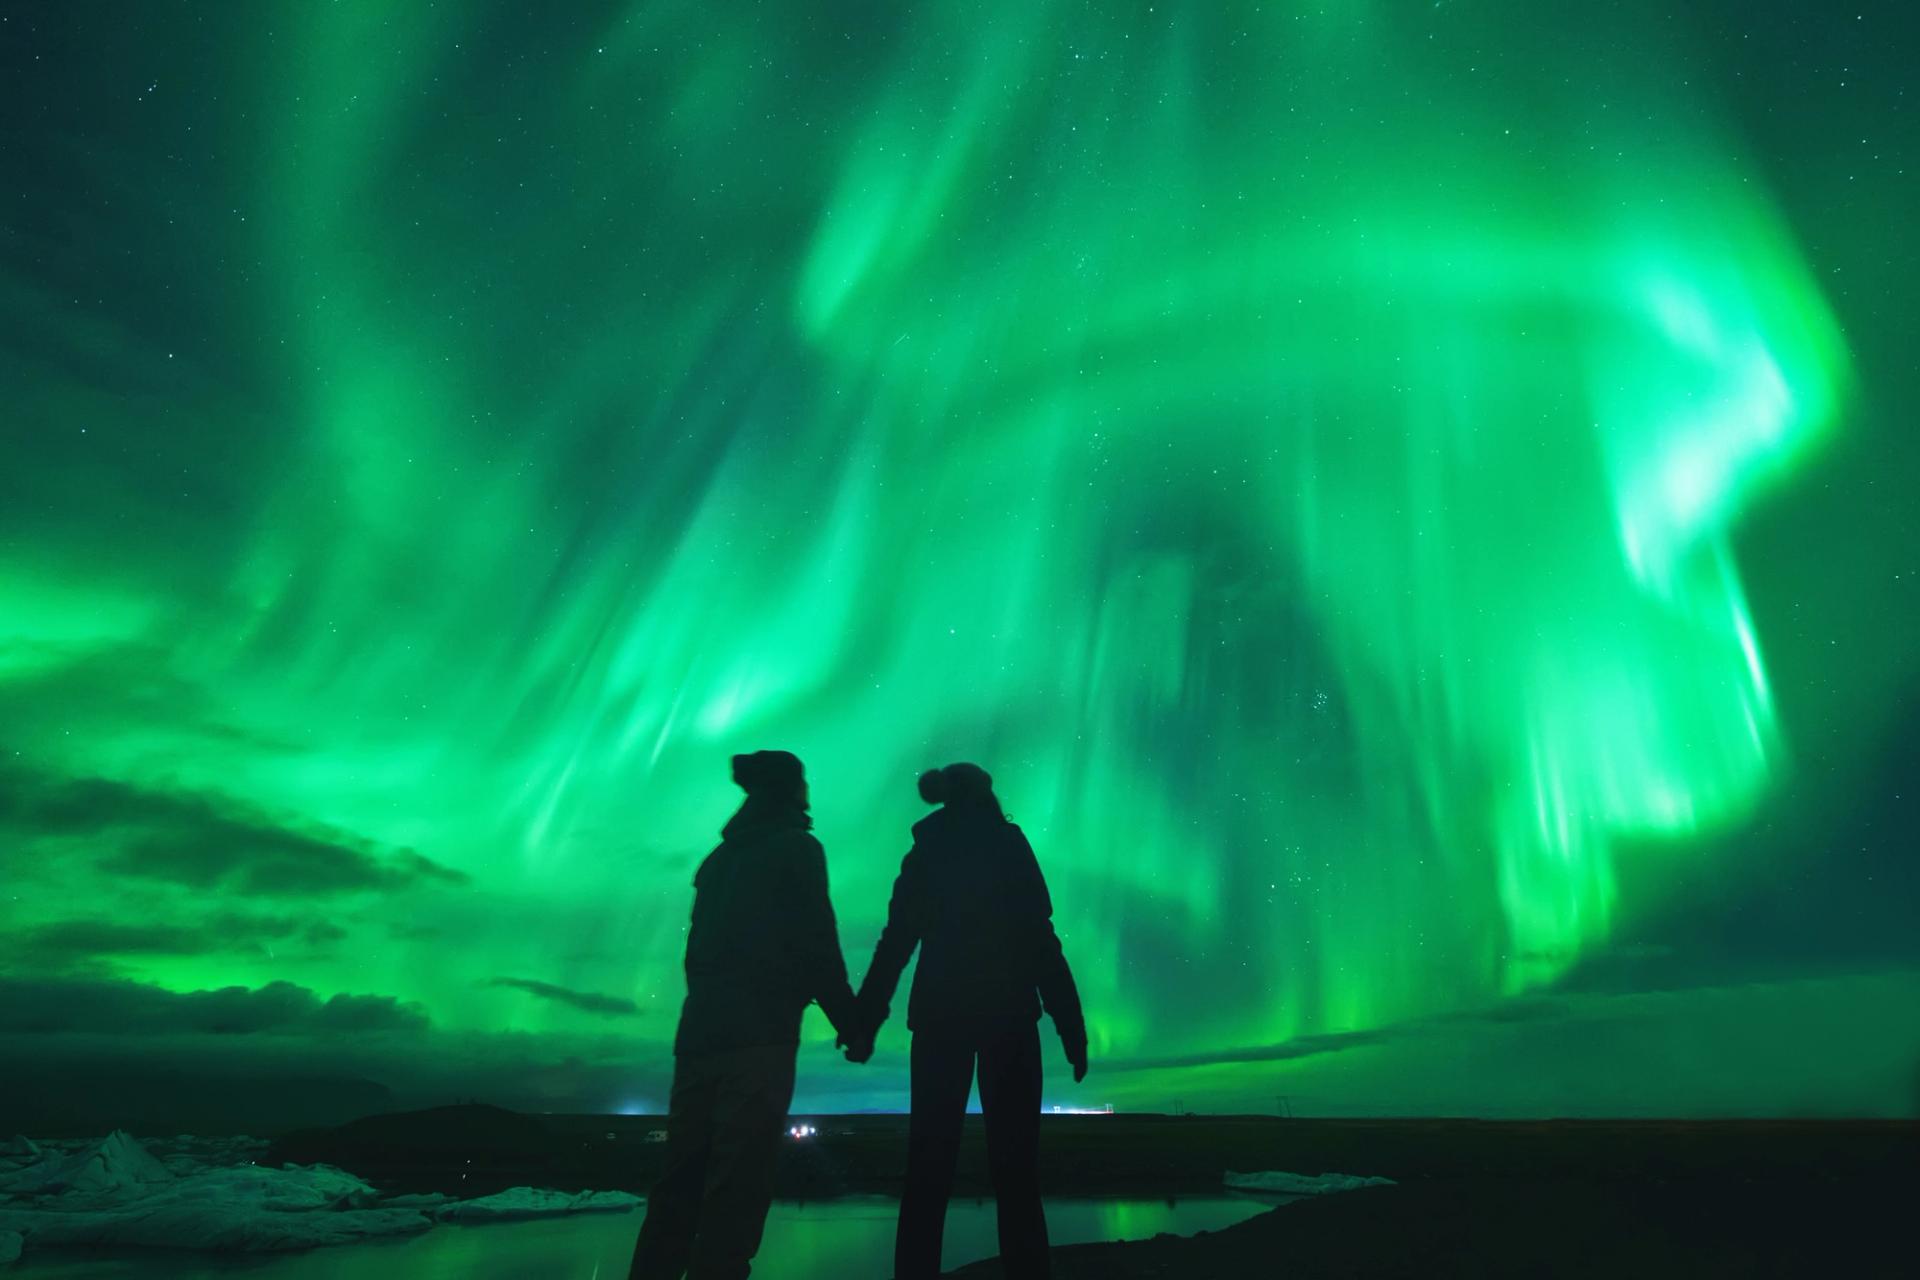 A couple visiting Iceland in September, enjoying the Northern Lights in the dark night sky